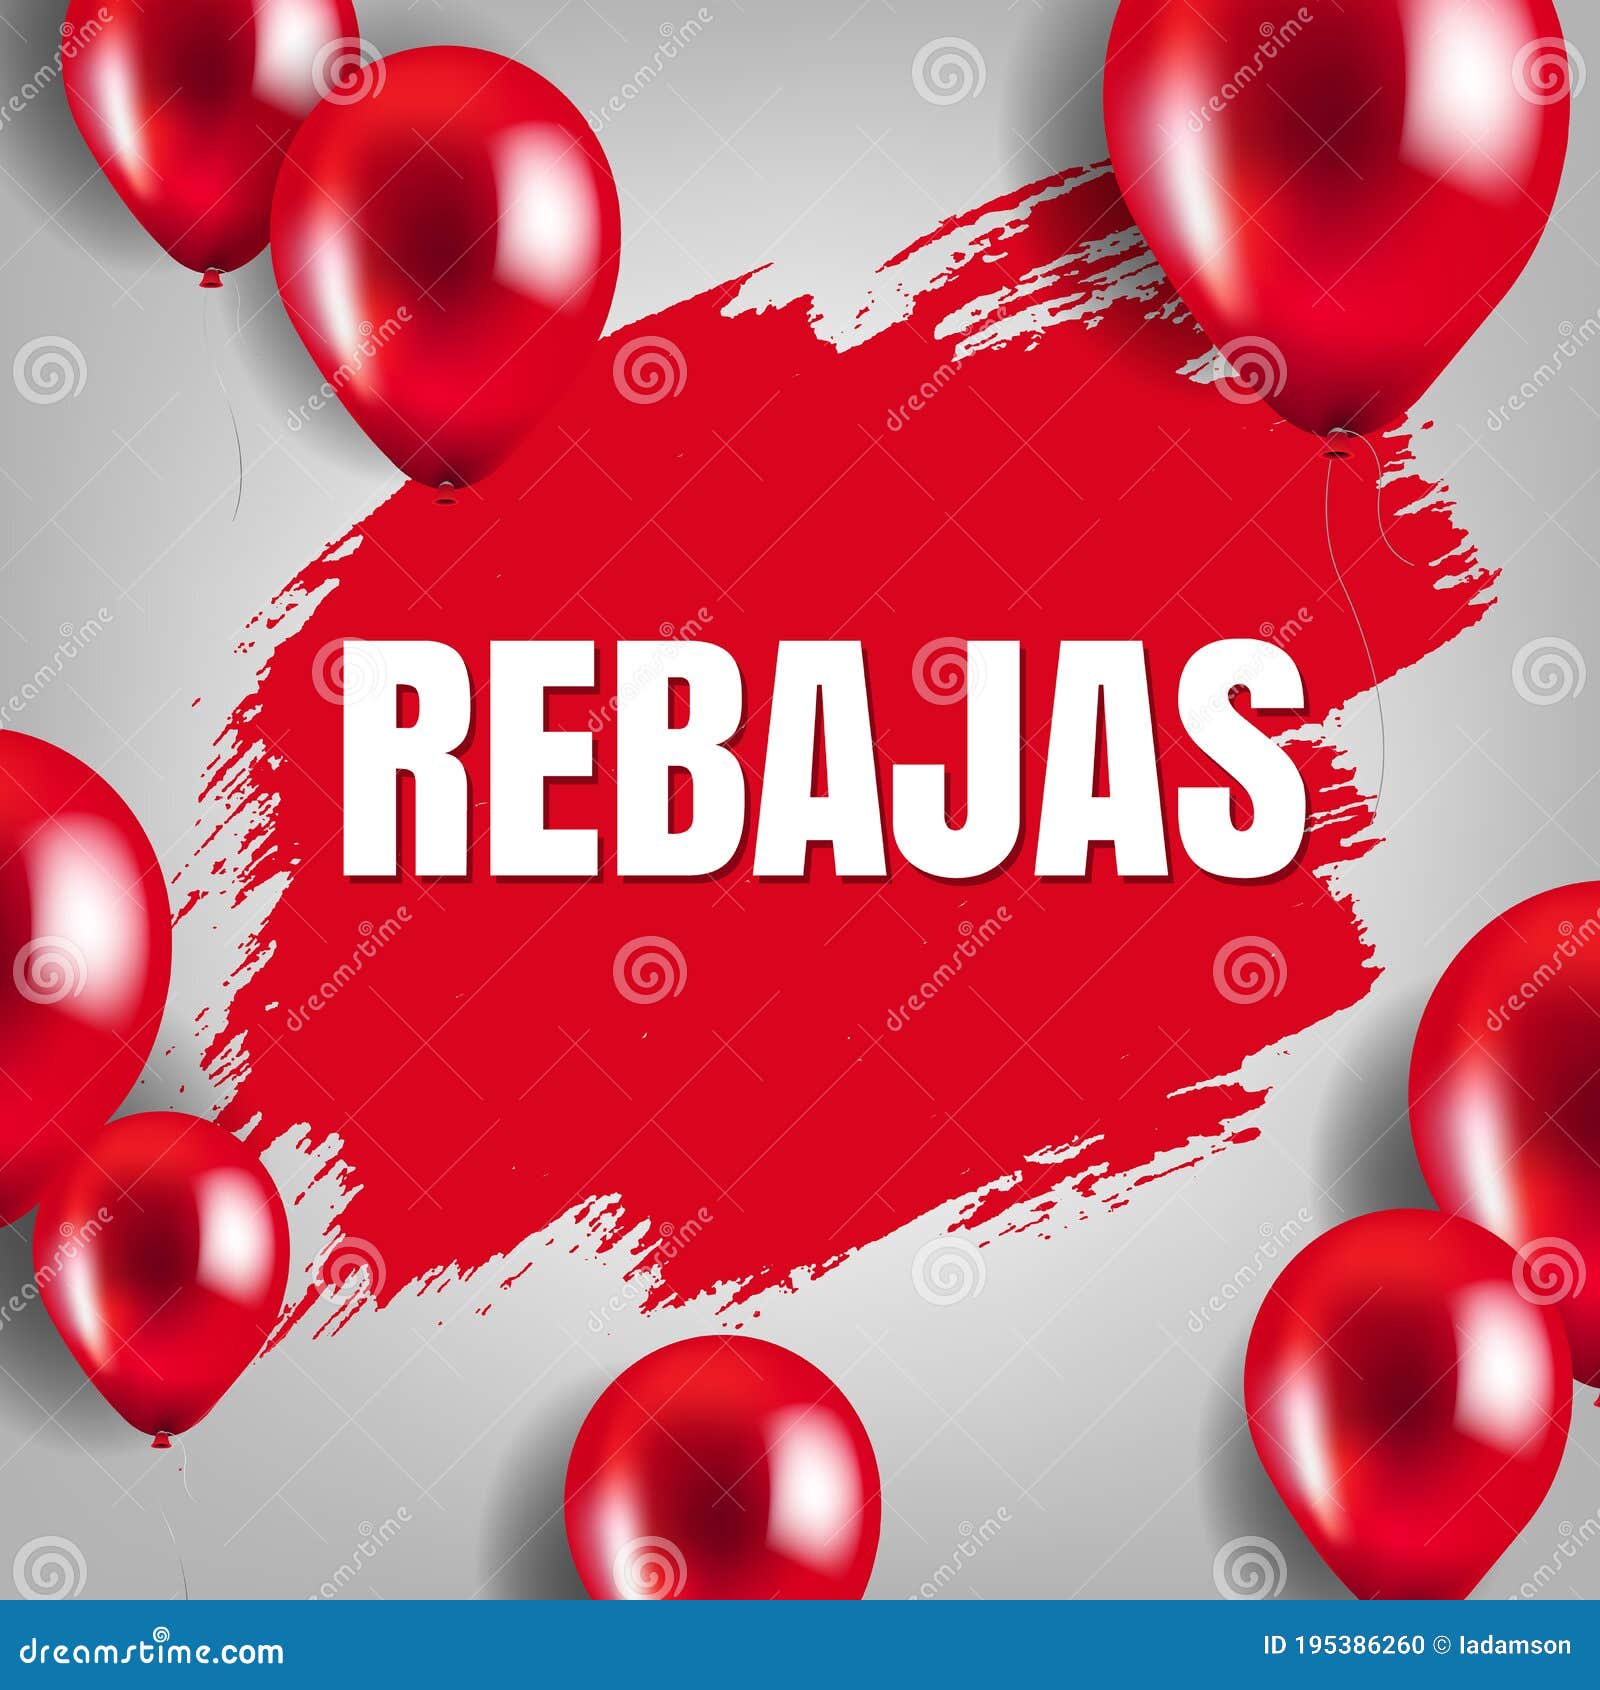 rebajas sale poster with balloon